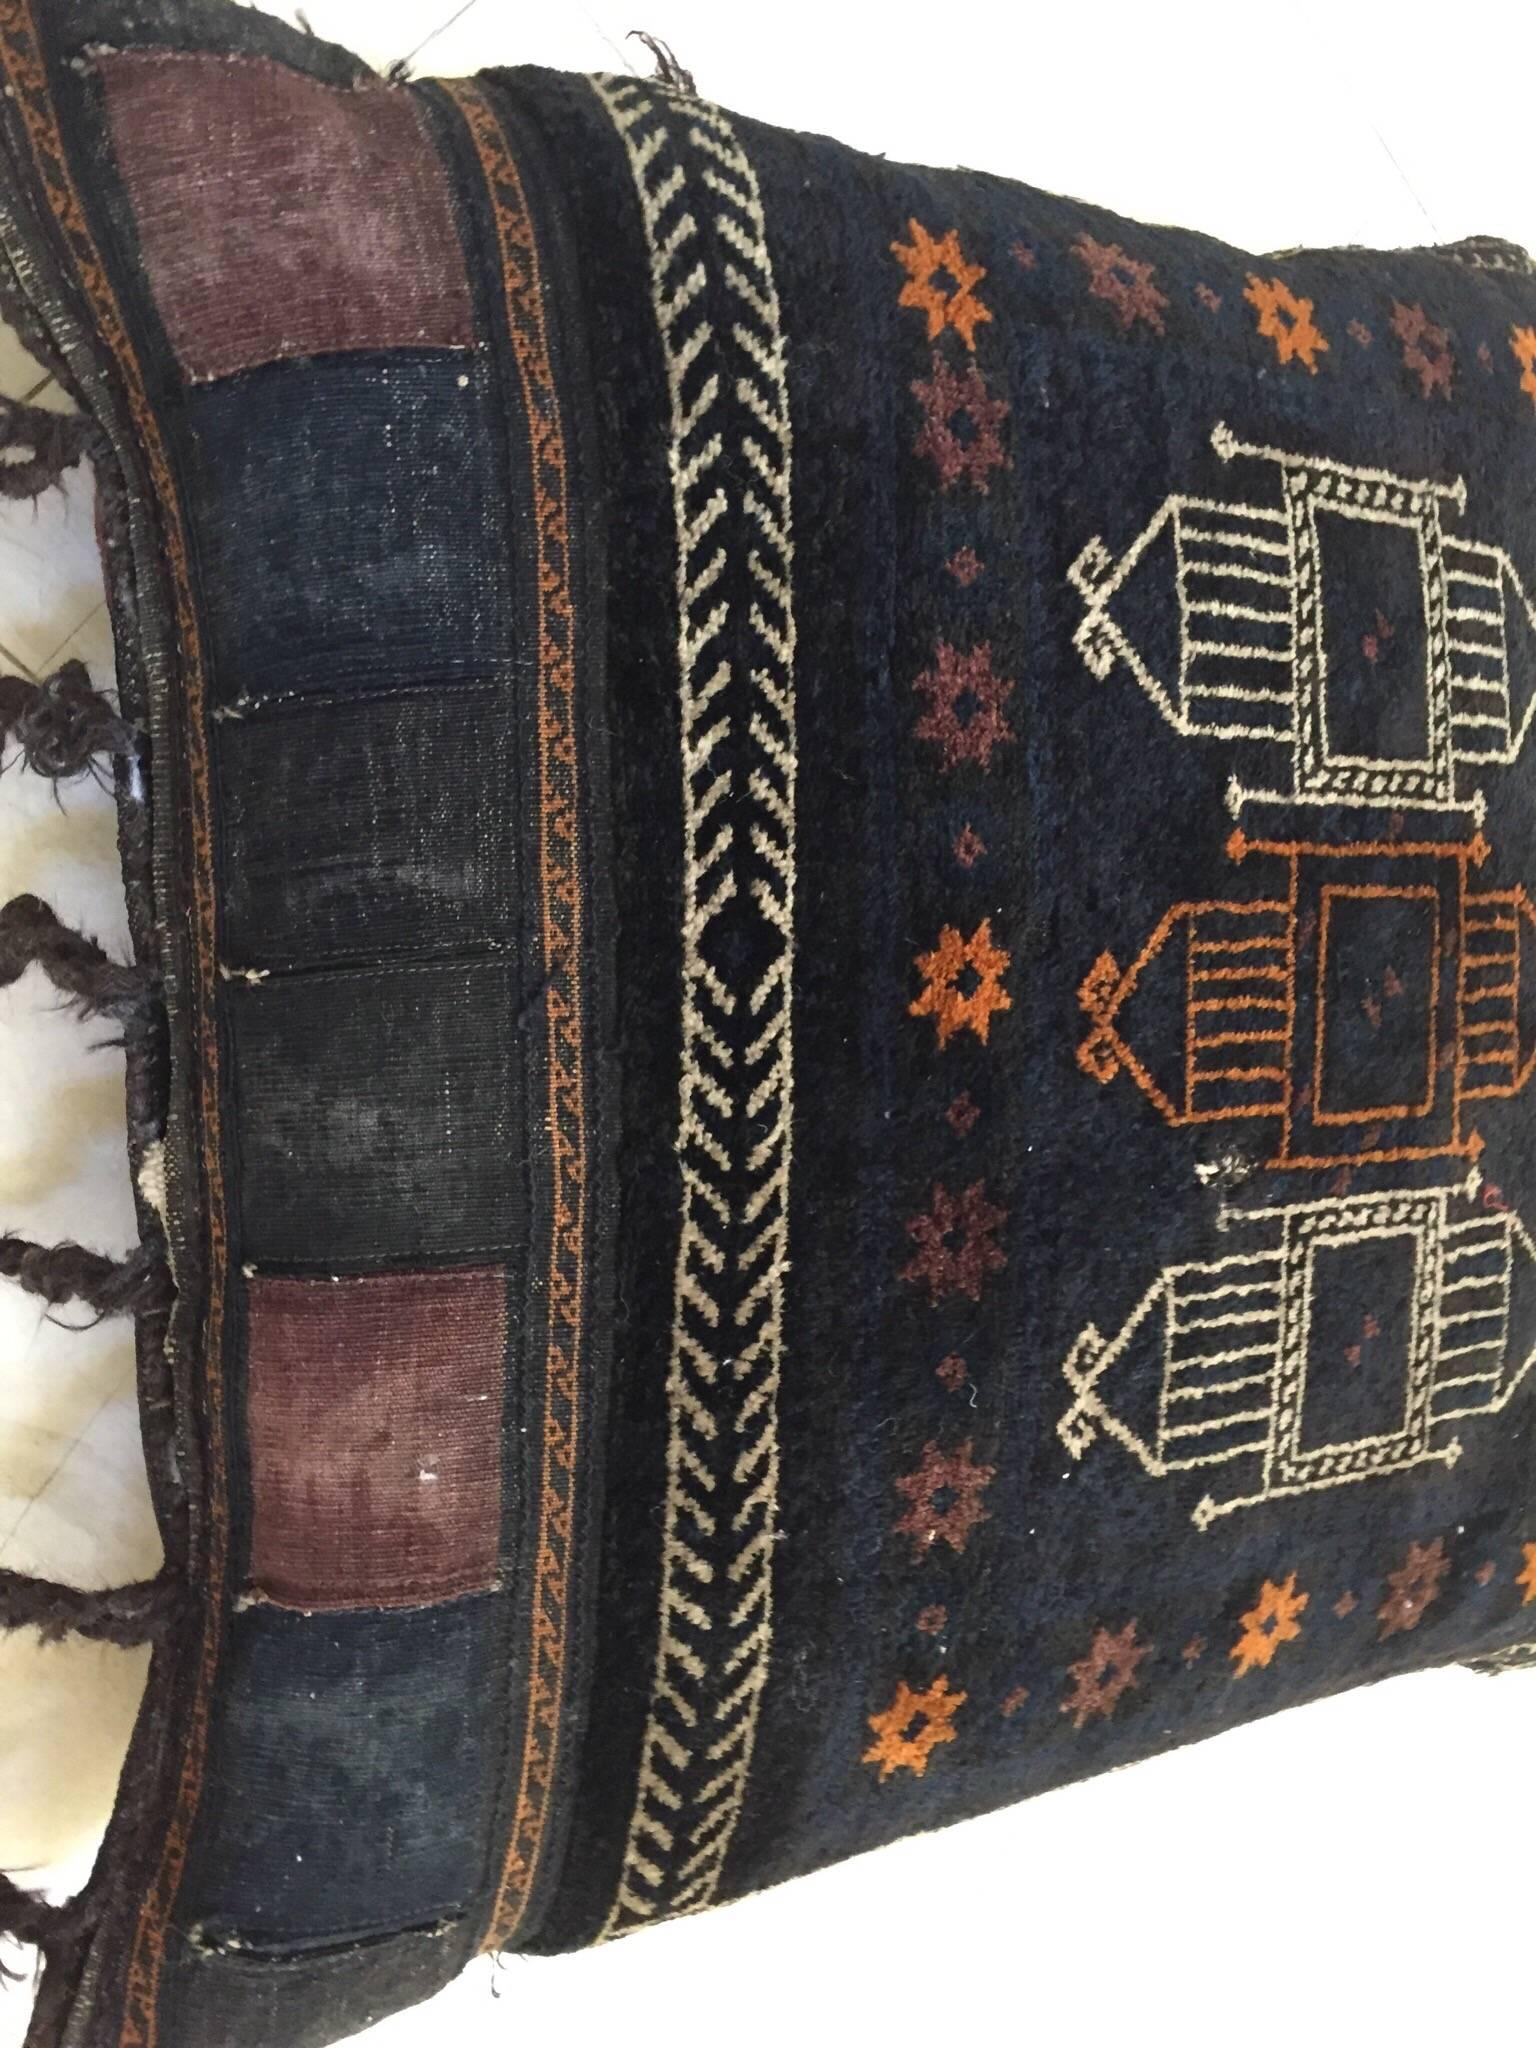 Handmade antique collectible Afghan Baluch camel saddle grain tribal bag,
circa 1880s, this large tribal camel grain bag was filled and made into a large floor pillow.
This tribal textile top rug has beautiful deep blue and black shades with soft